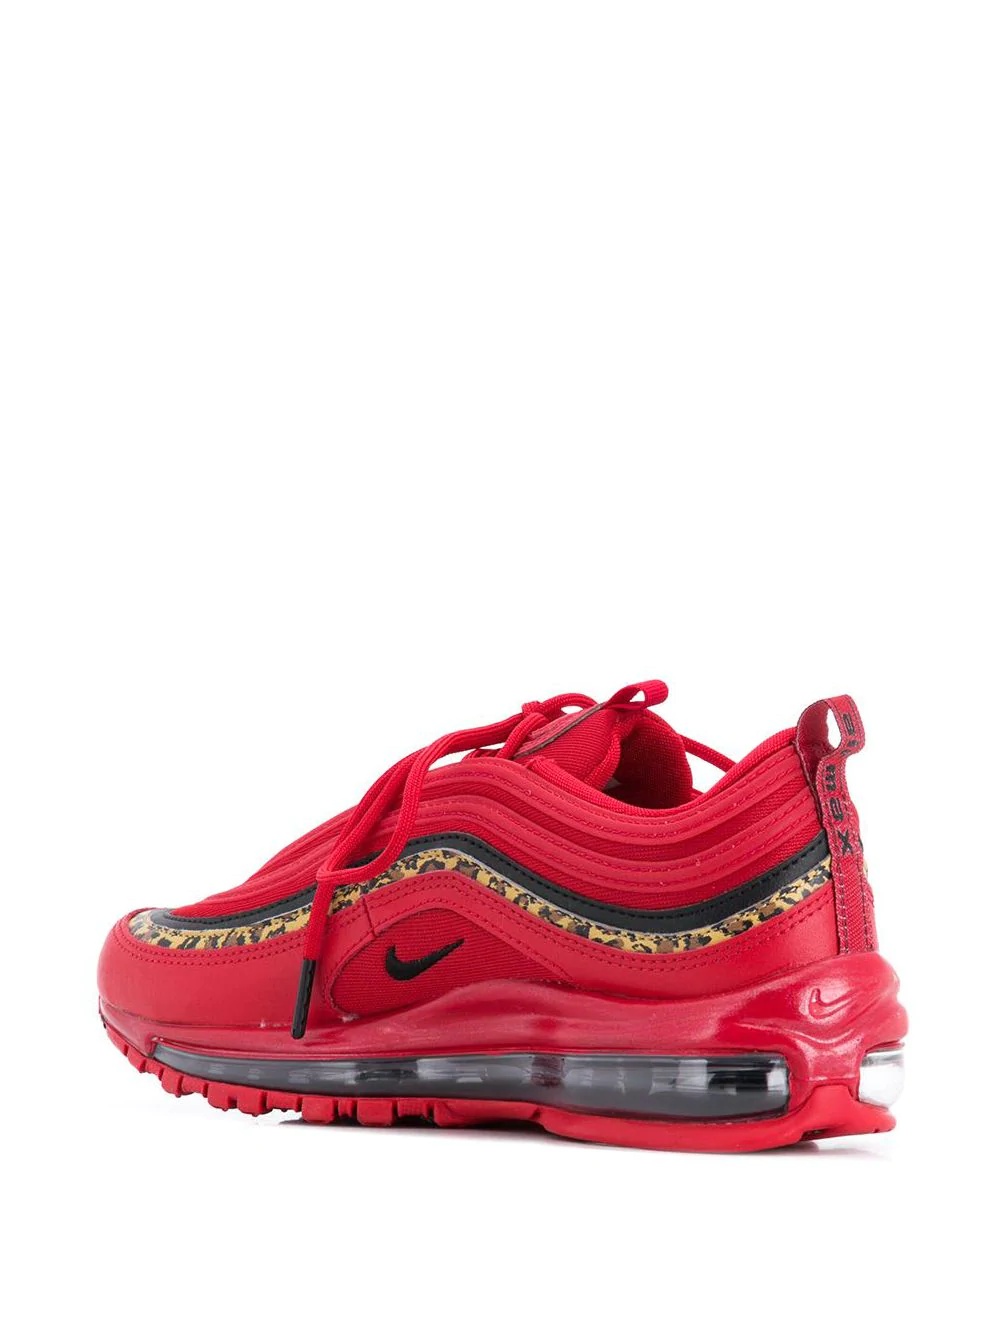 Air Max 97 "Leopard Pack - Red" sneakers - 3